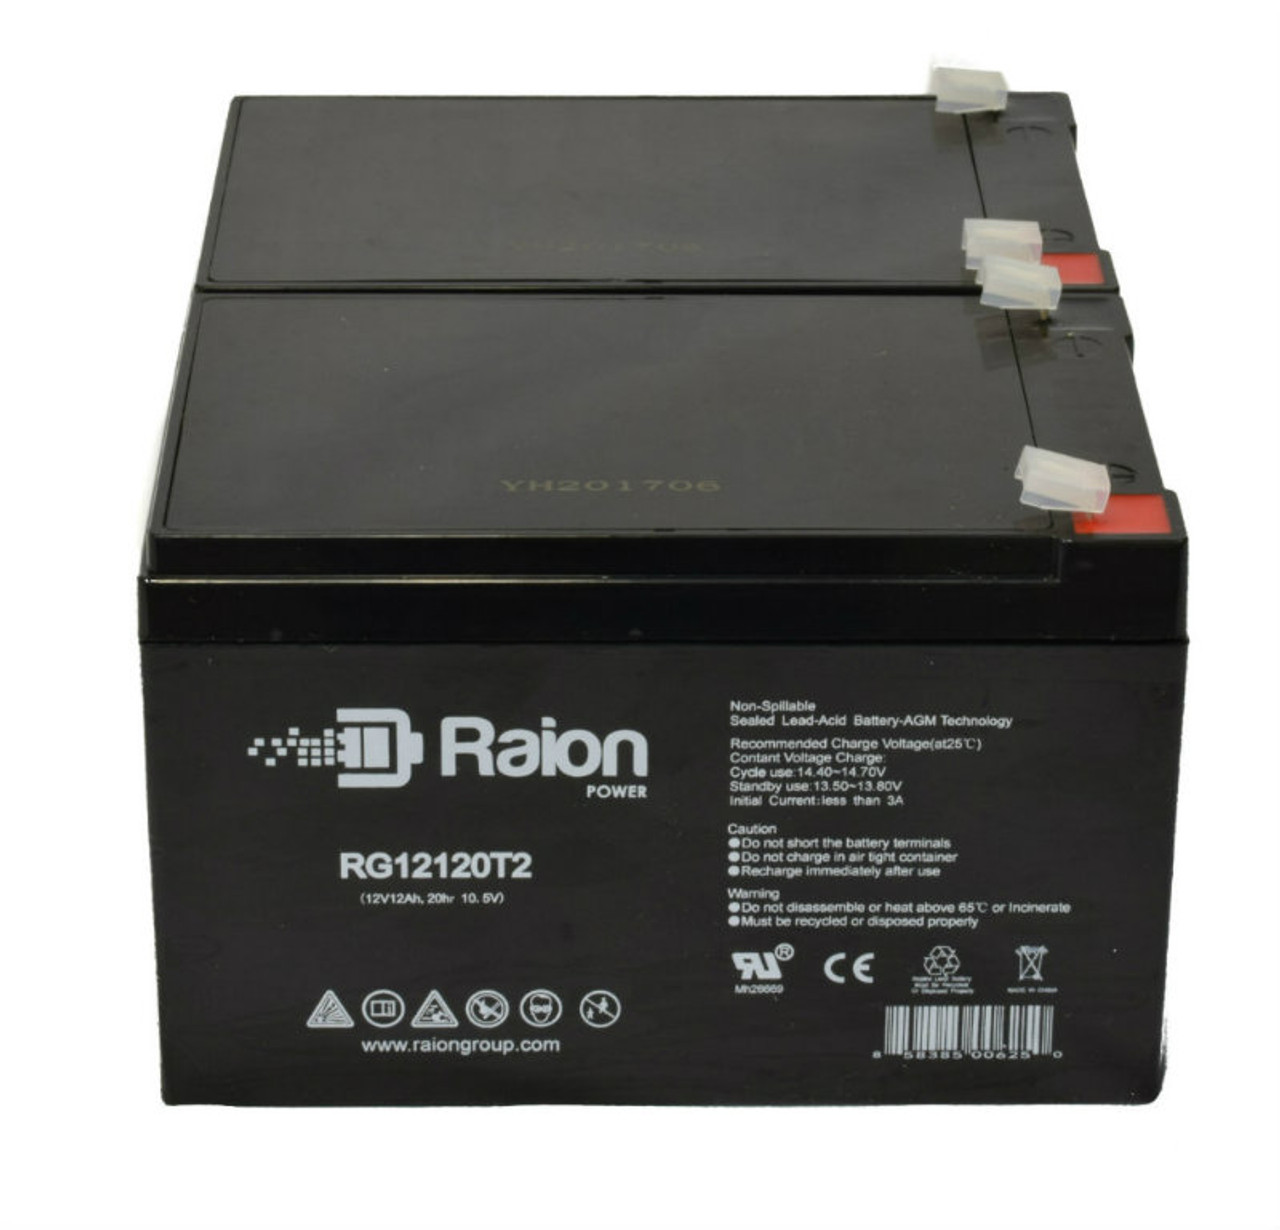 Raion Power 12V 12Ah Non-Spillable Compatible Replacement Battery for Delta DTM 1212 - (2 Pack)